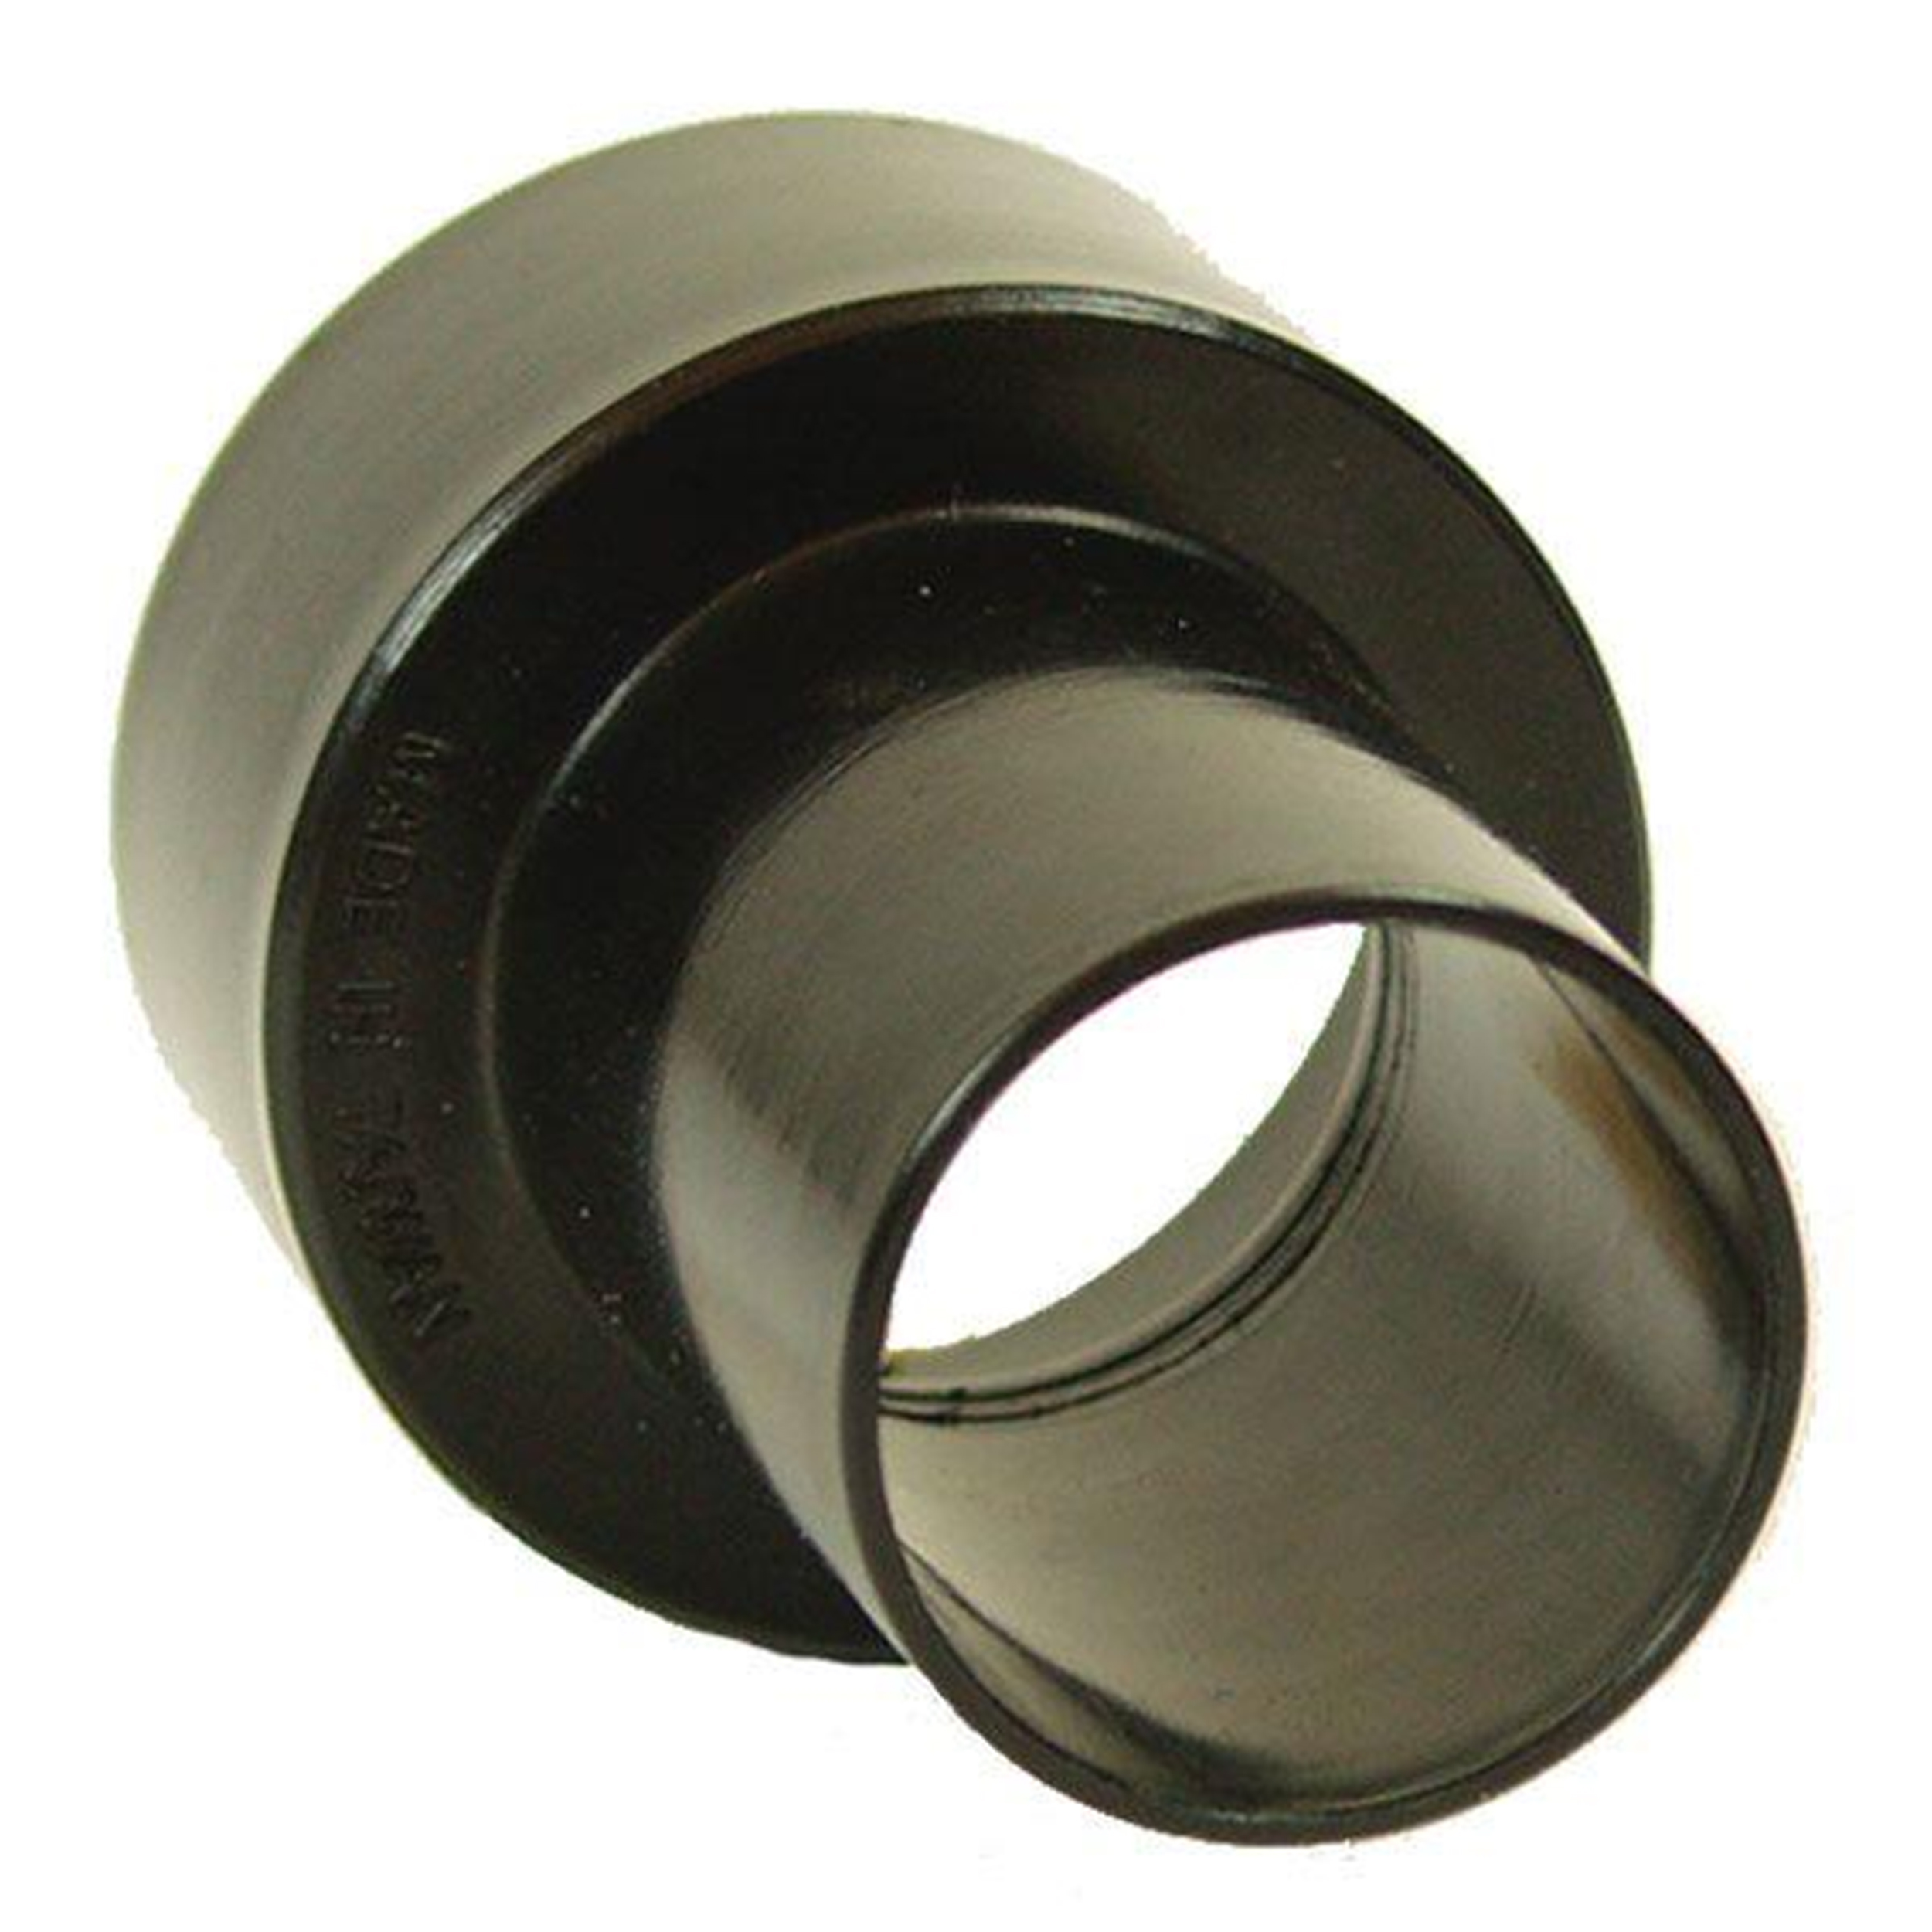 1-1/2" To 2-1/4" Adapter Dust Collection Fitting